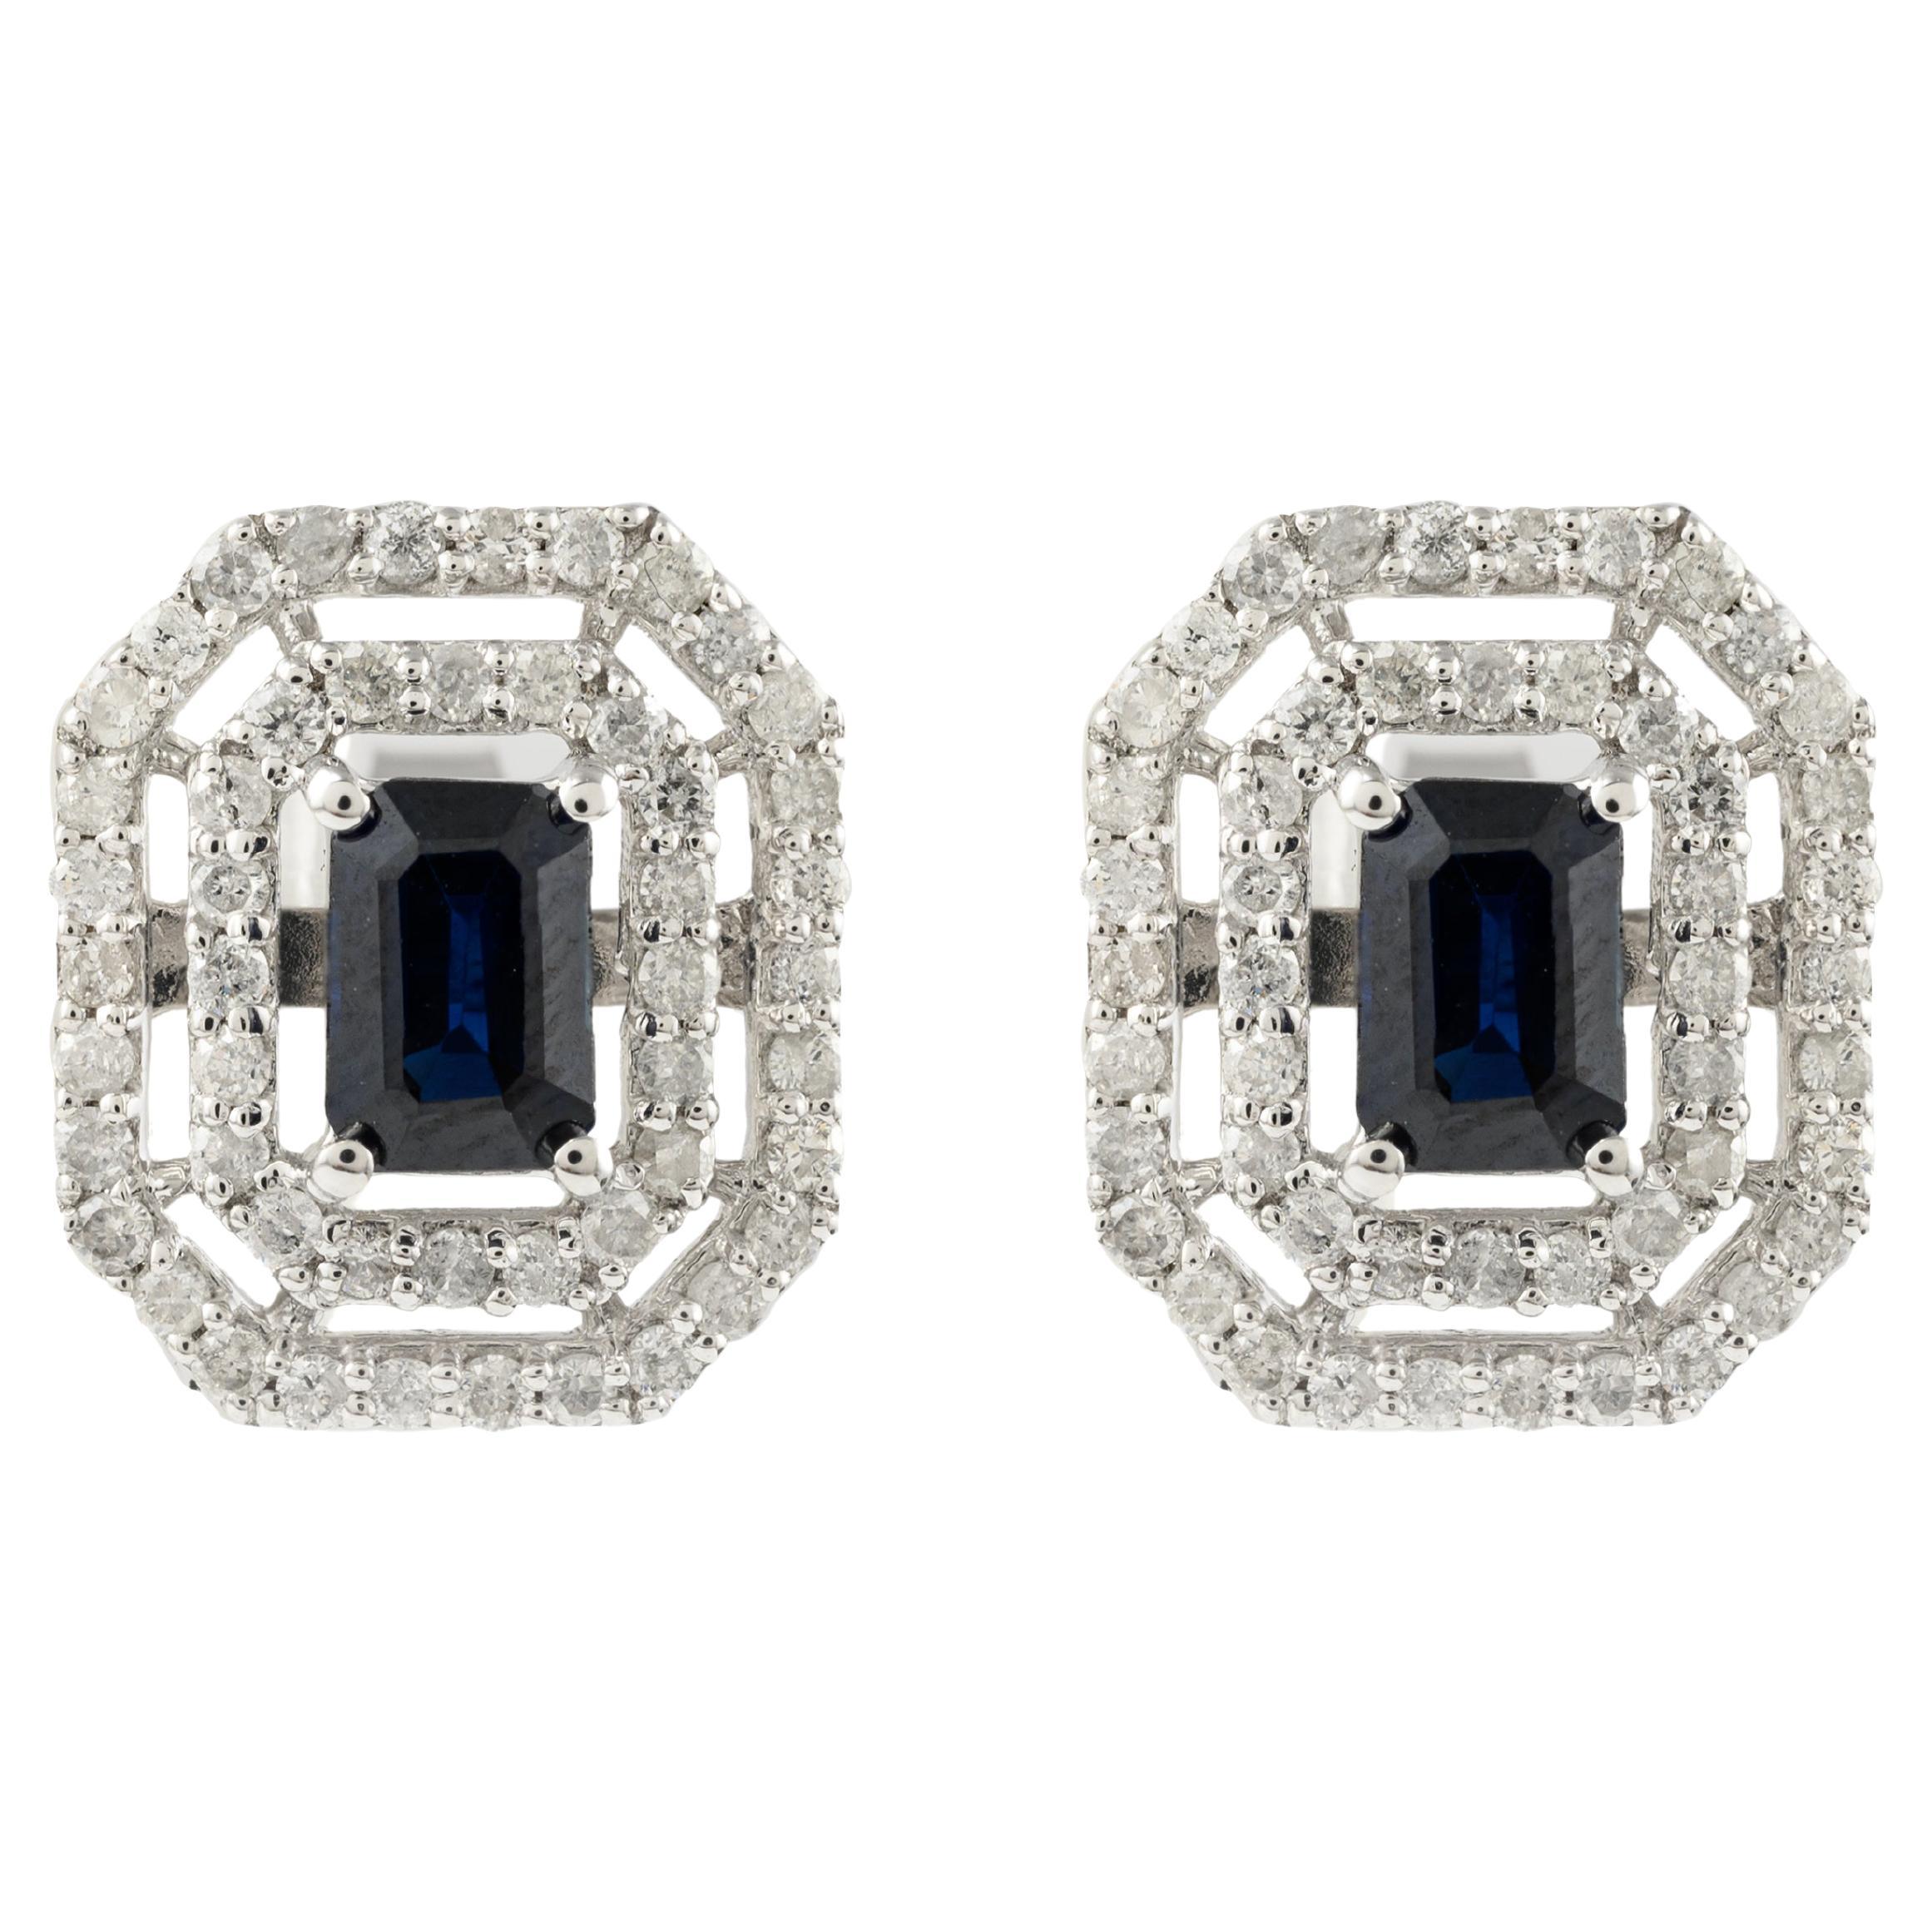 Regal Blue Sapphire Diamond Wedding Stud Earrings Crafted in 14k White Gold For Sale